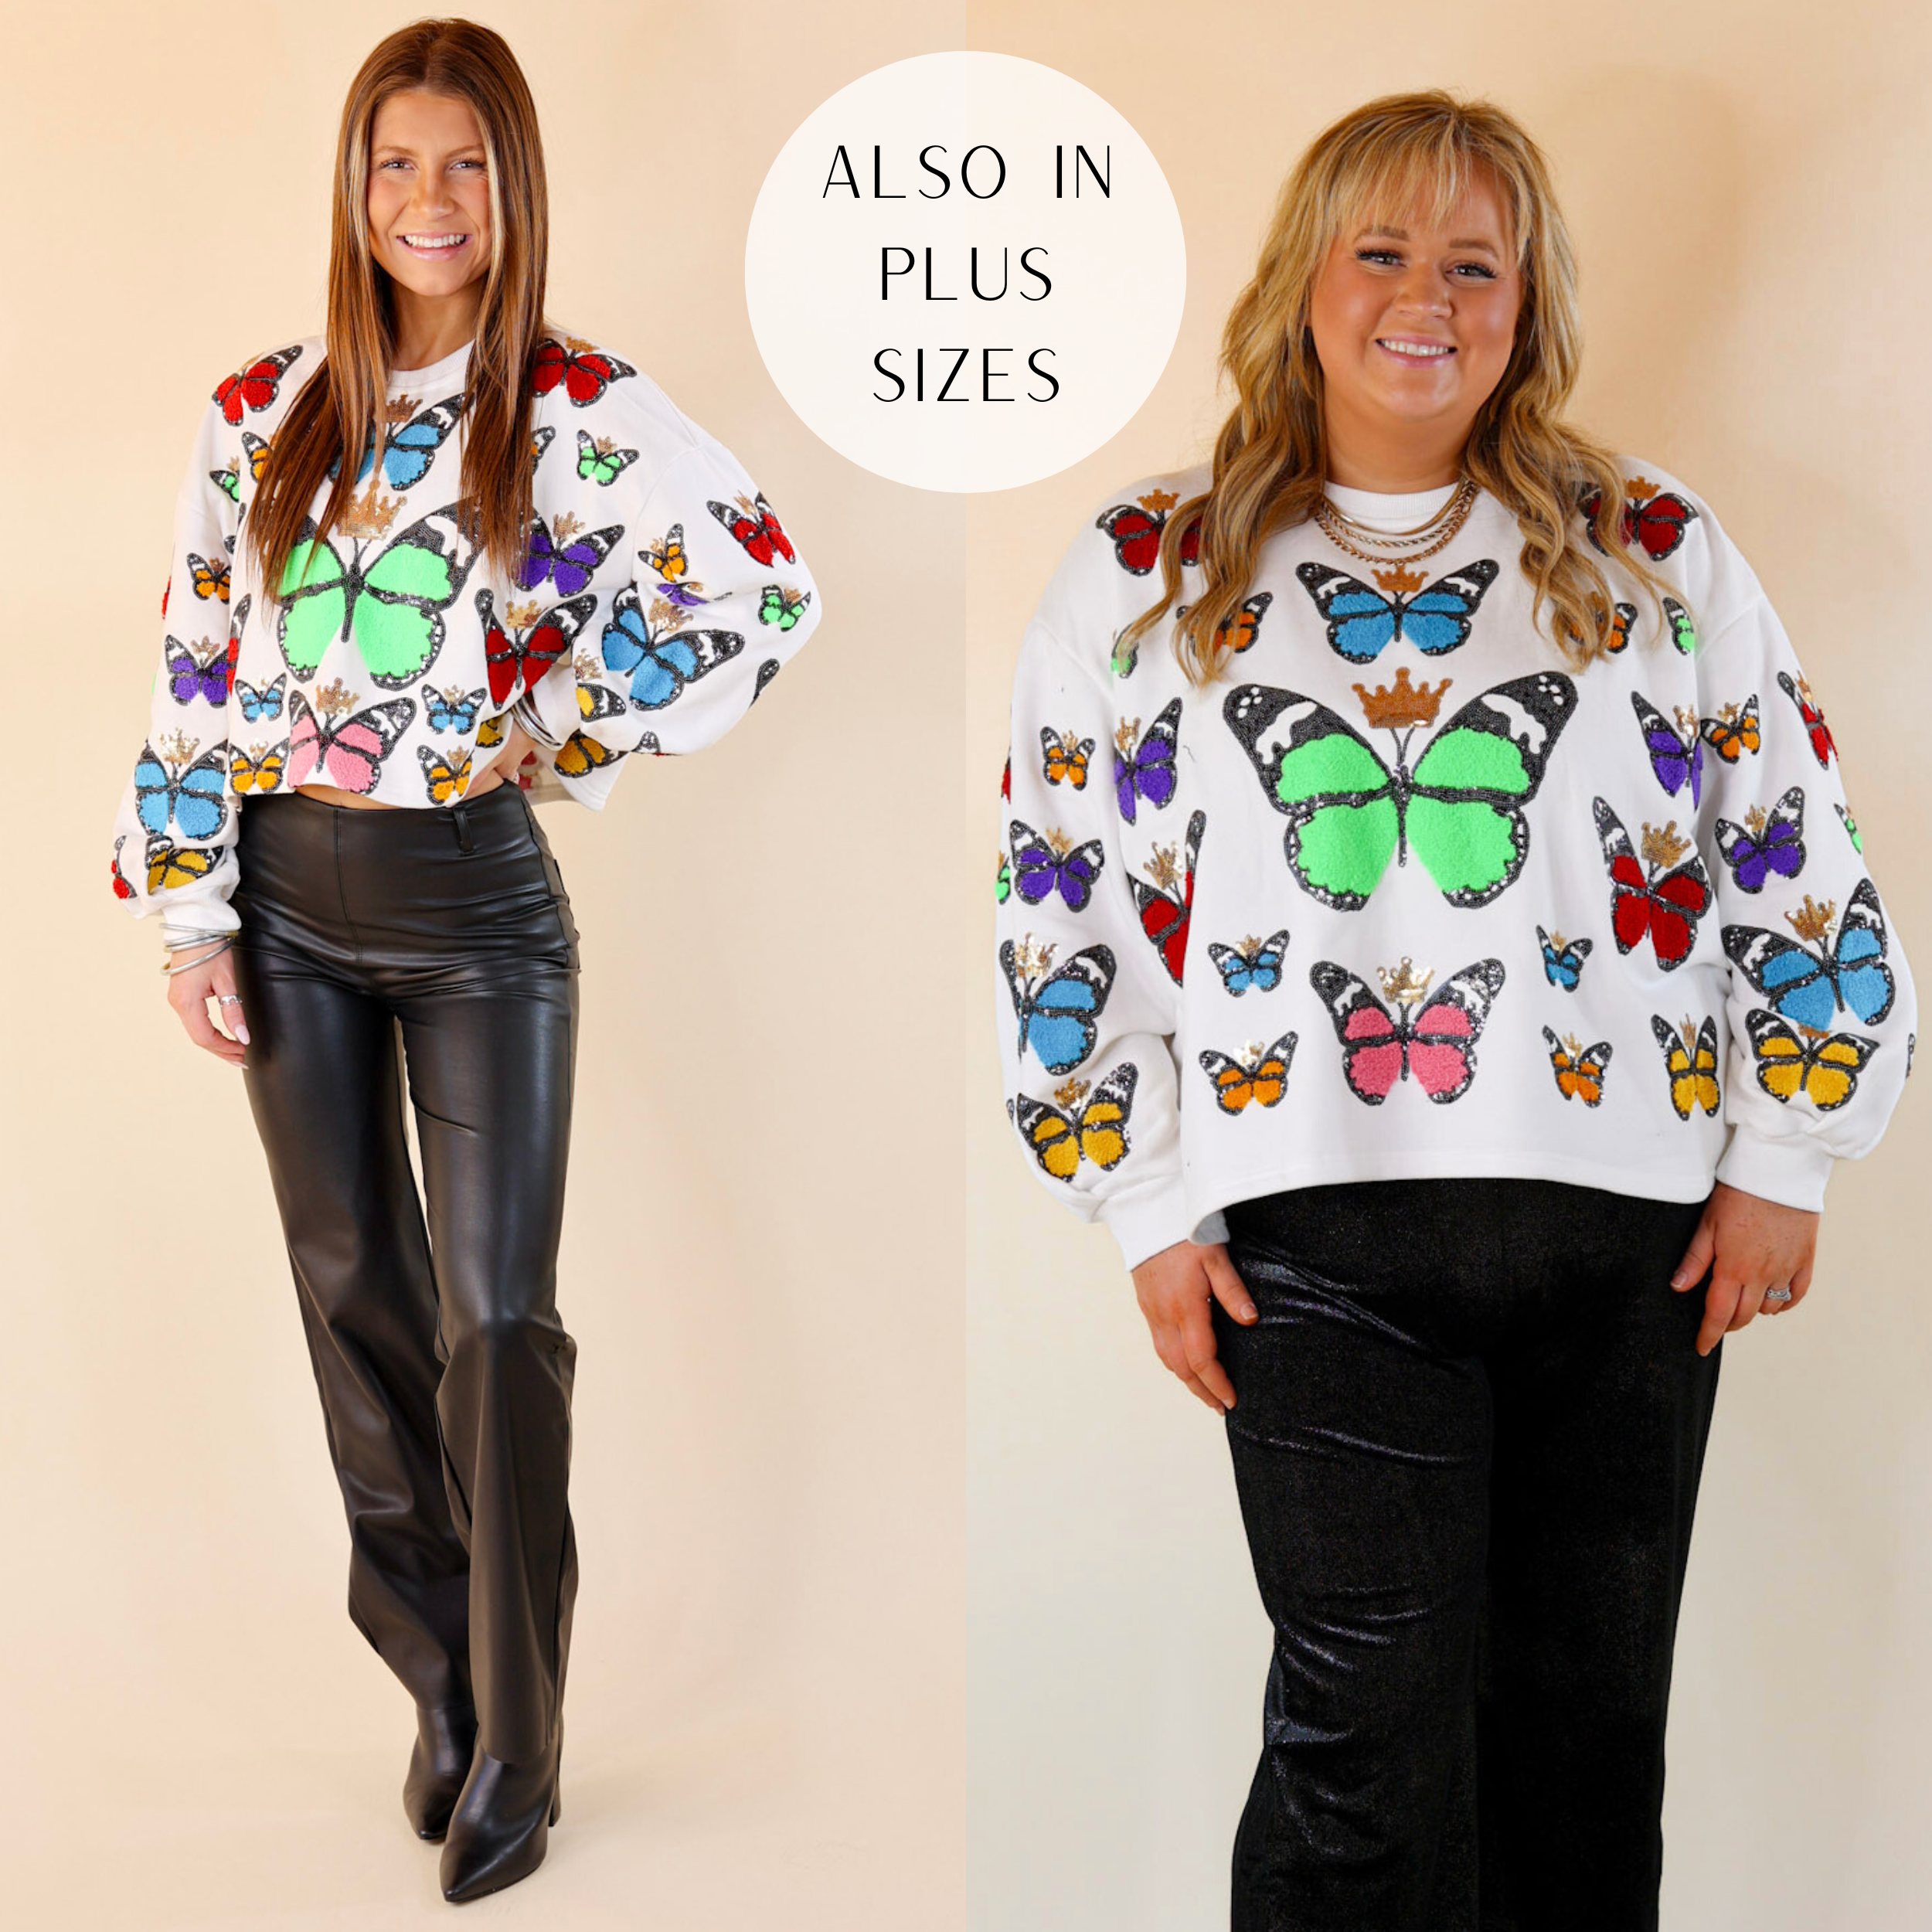 Models are wearing a white long sleeve sweatshirt with multicolored butterflies all over. Size small has it paired with black Lyssé pants black booties, and silver jewelry. Size plus has it paired with black pants and silver jewelry. 